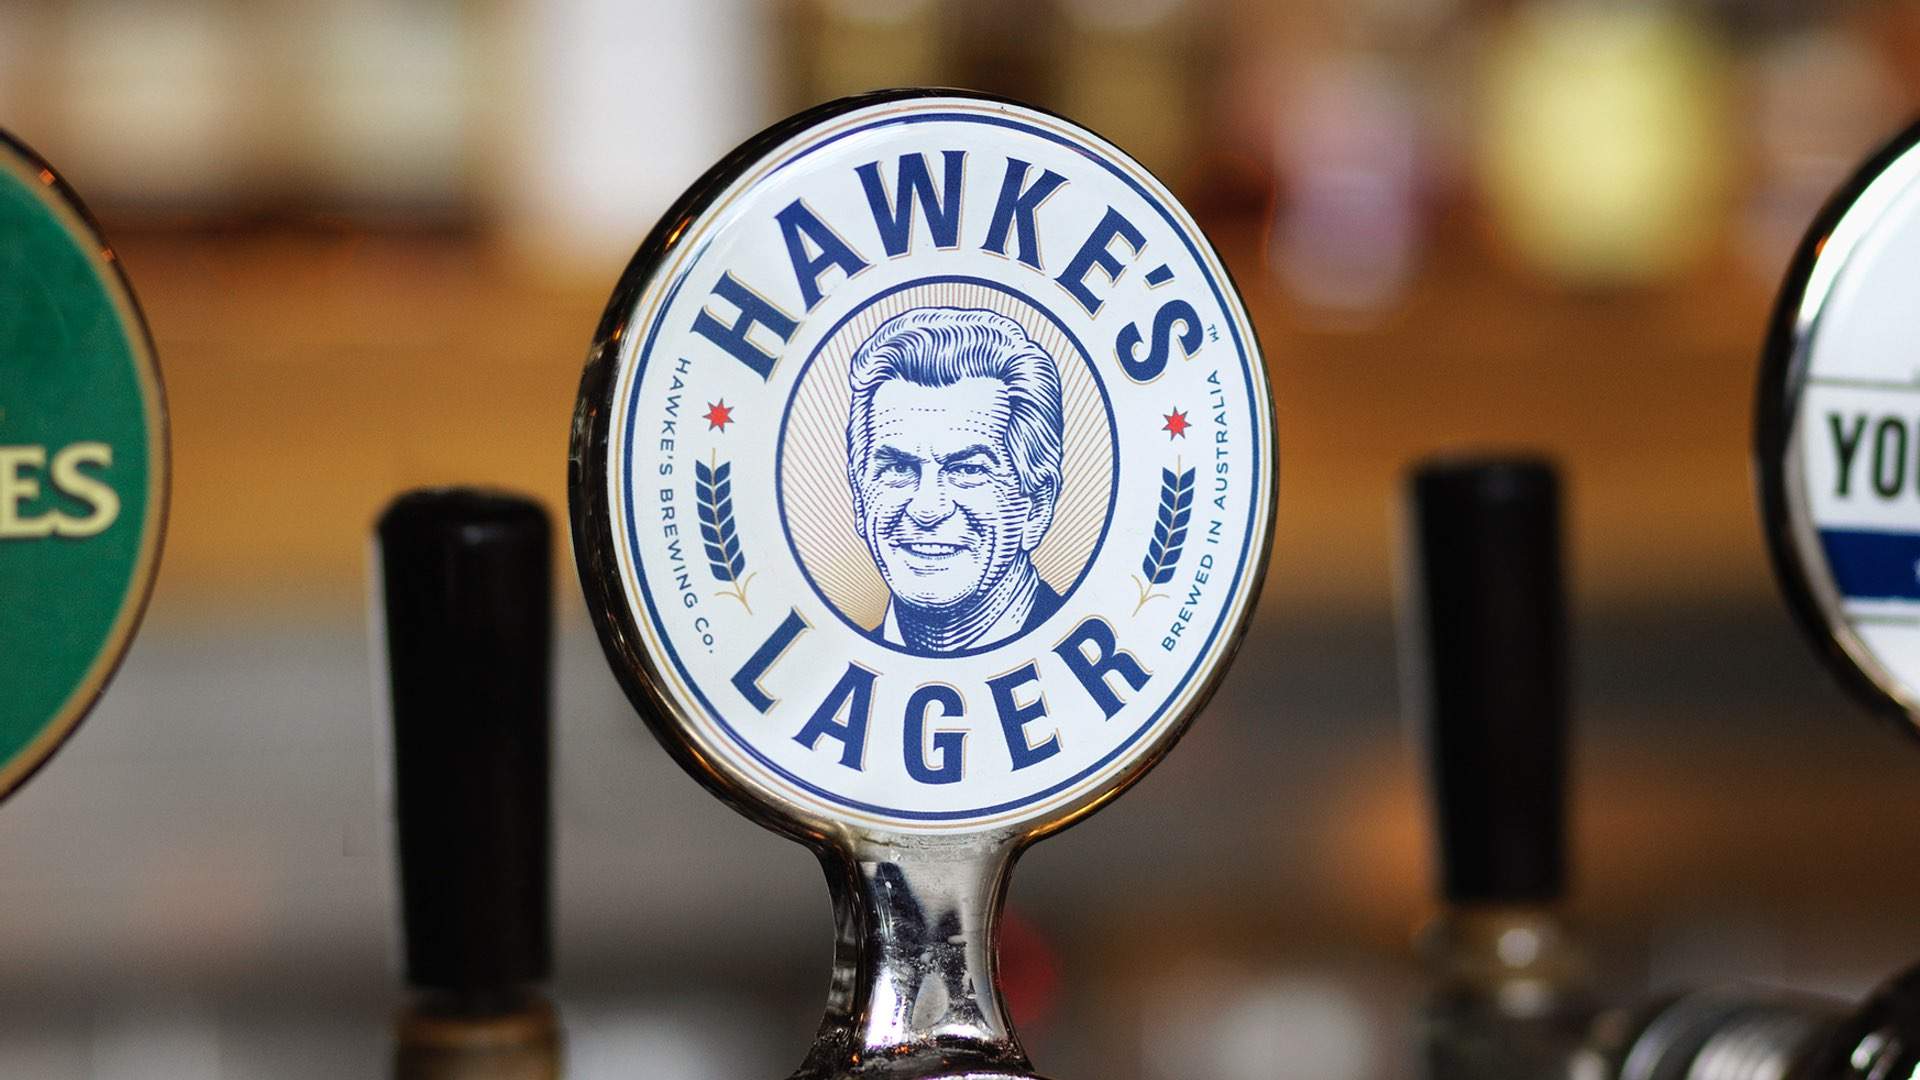 Former Prime Minister Bob Hawke Has Launched His Own Beer, Hawke's Brewing